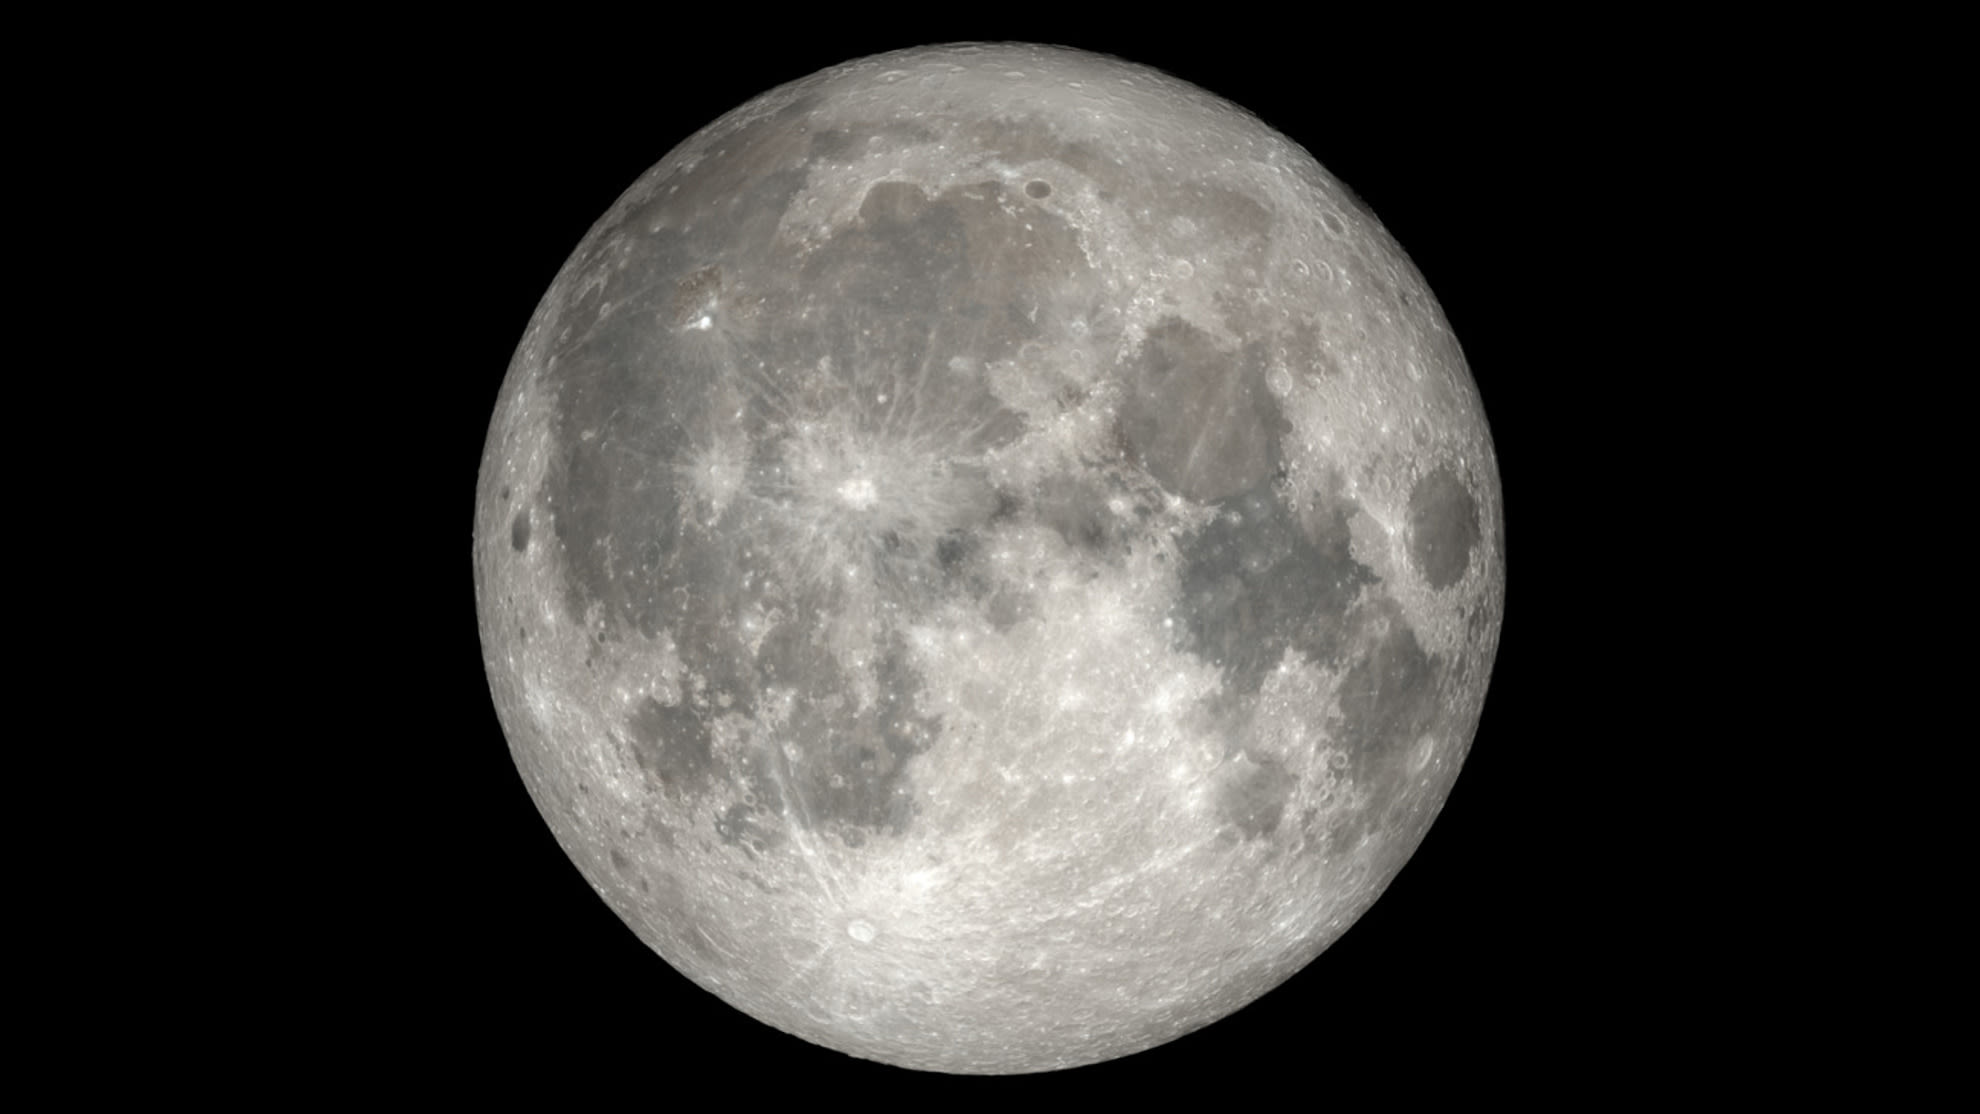 Look up! The Full Buck Moon lights up the night sky this weekend